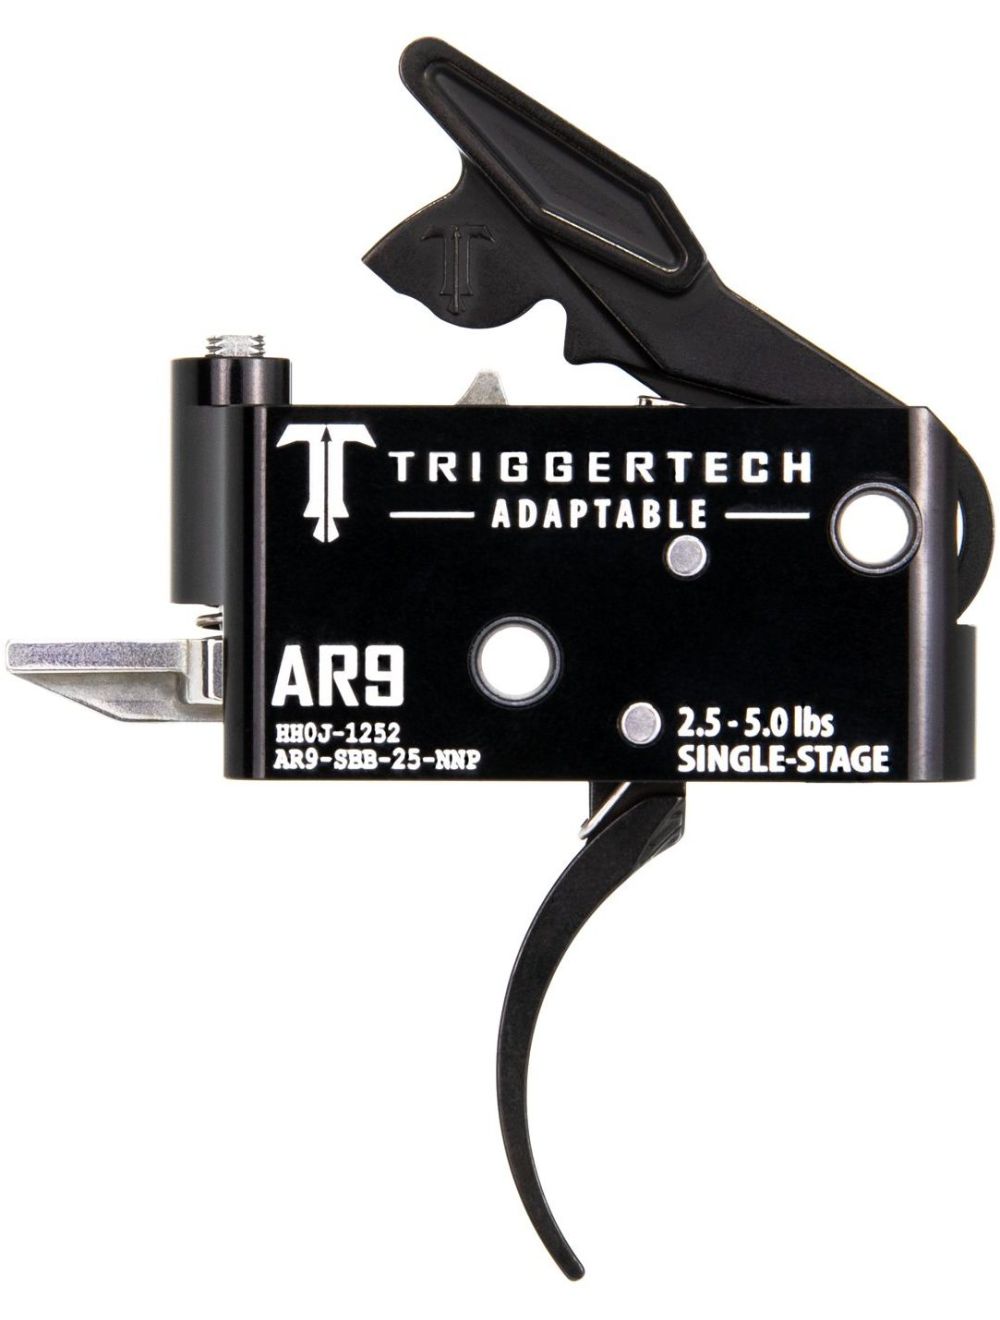 AR9 Single-Stage Adaptable Trigger